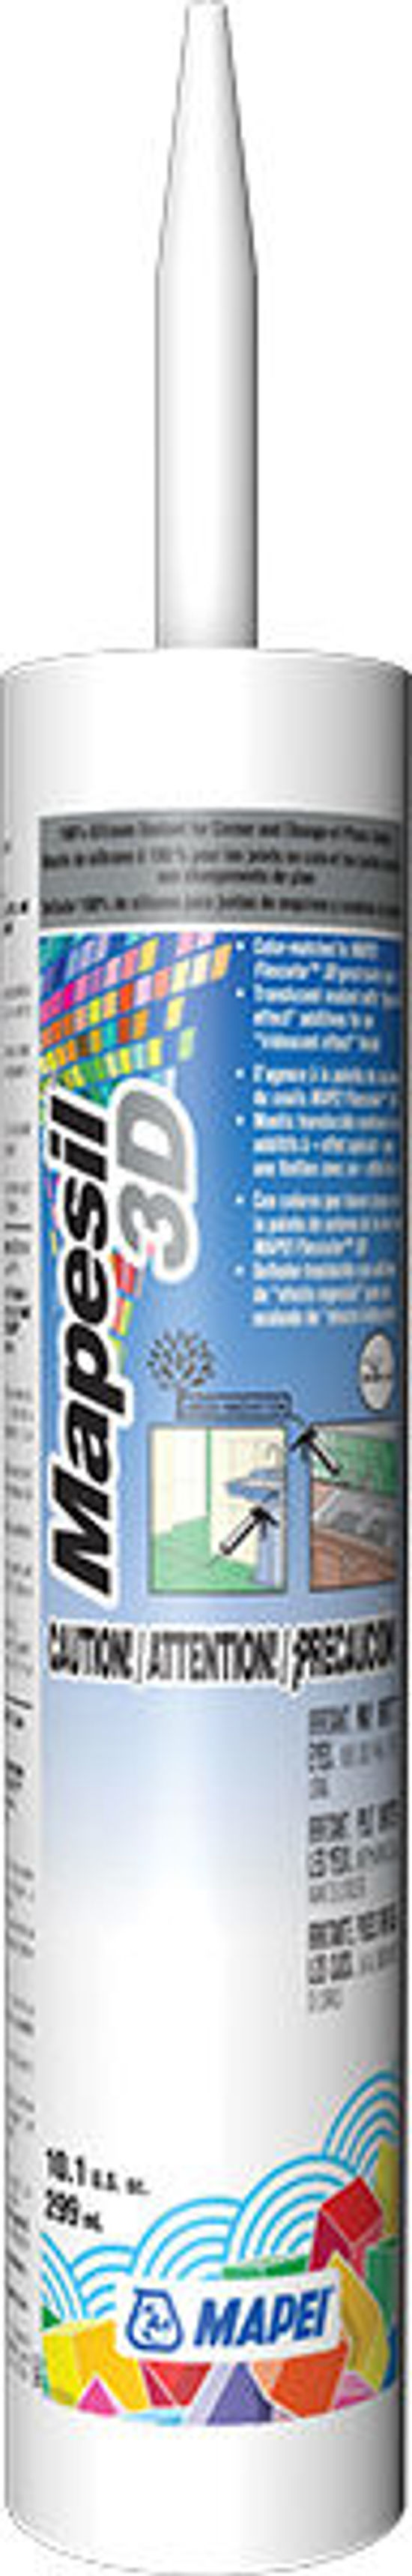 Mapesil 3D - 100% Silicone Sealant with an “Iridescent Effect” 299 mL - Copper Dawn #208